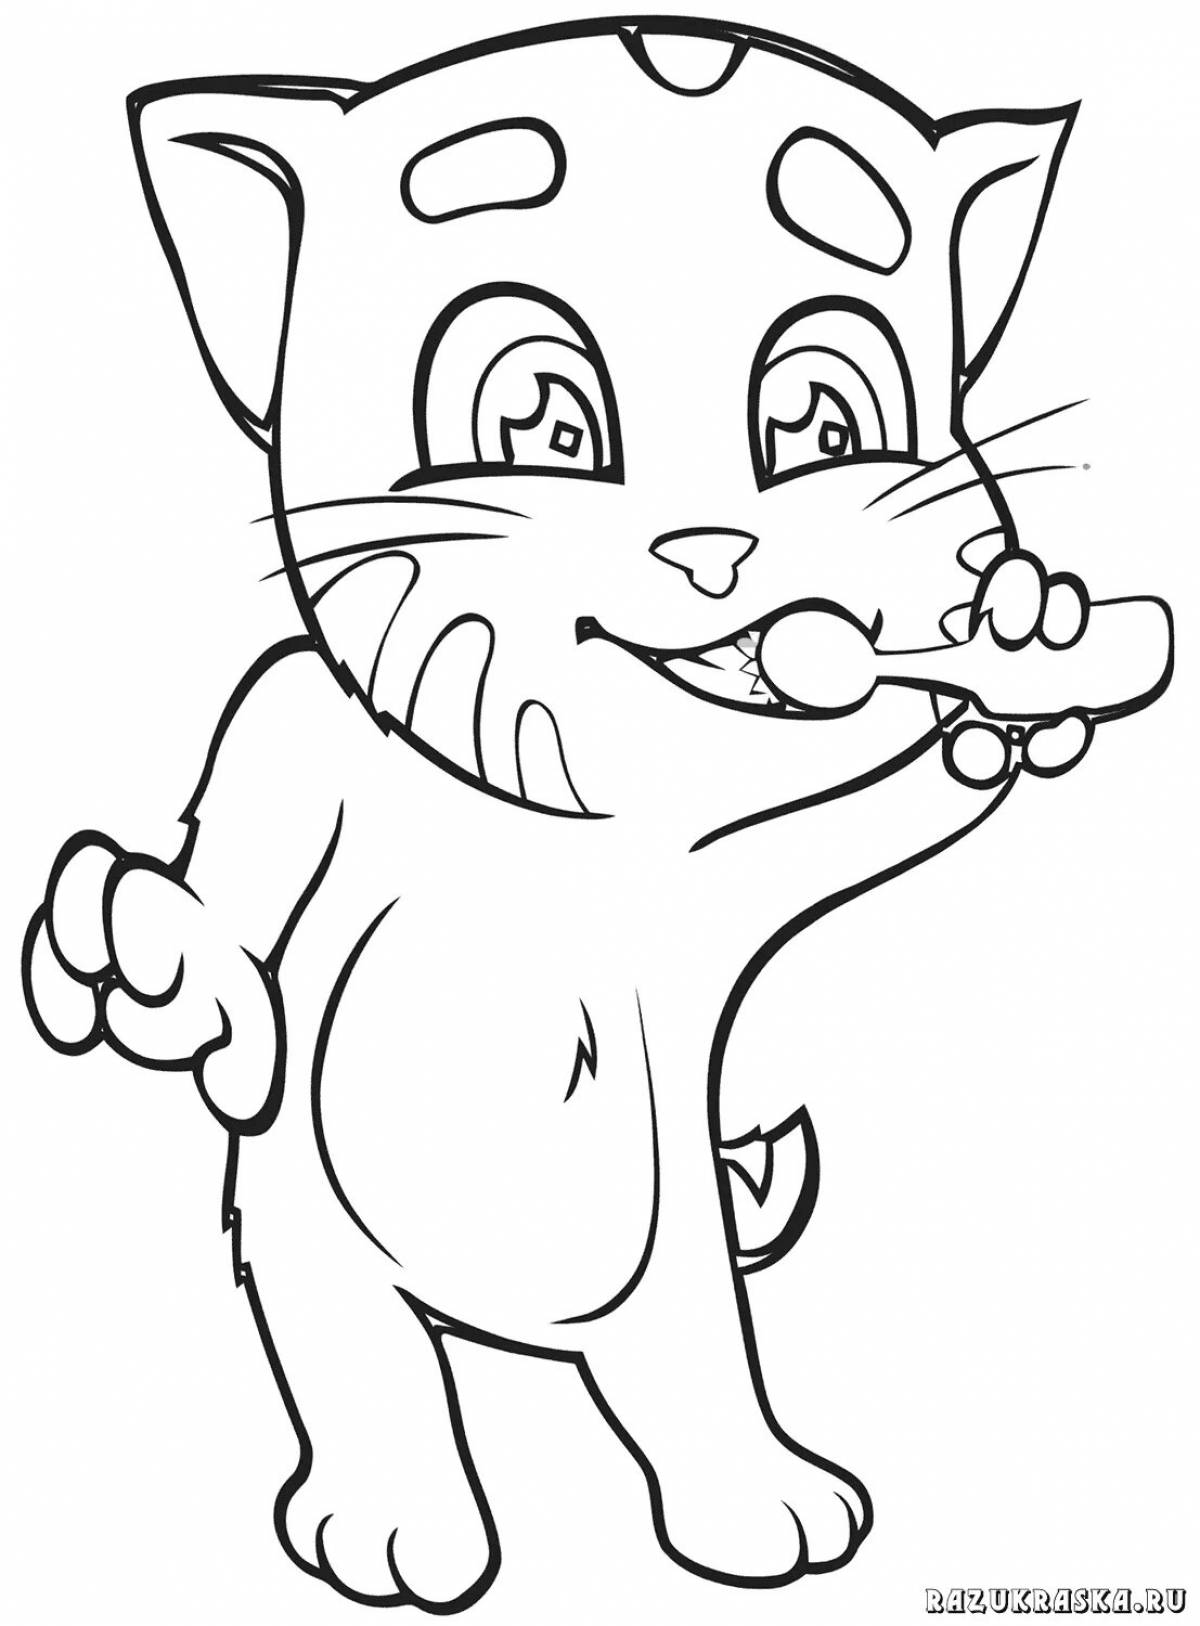 Regal run for gold coloring page